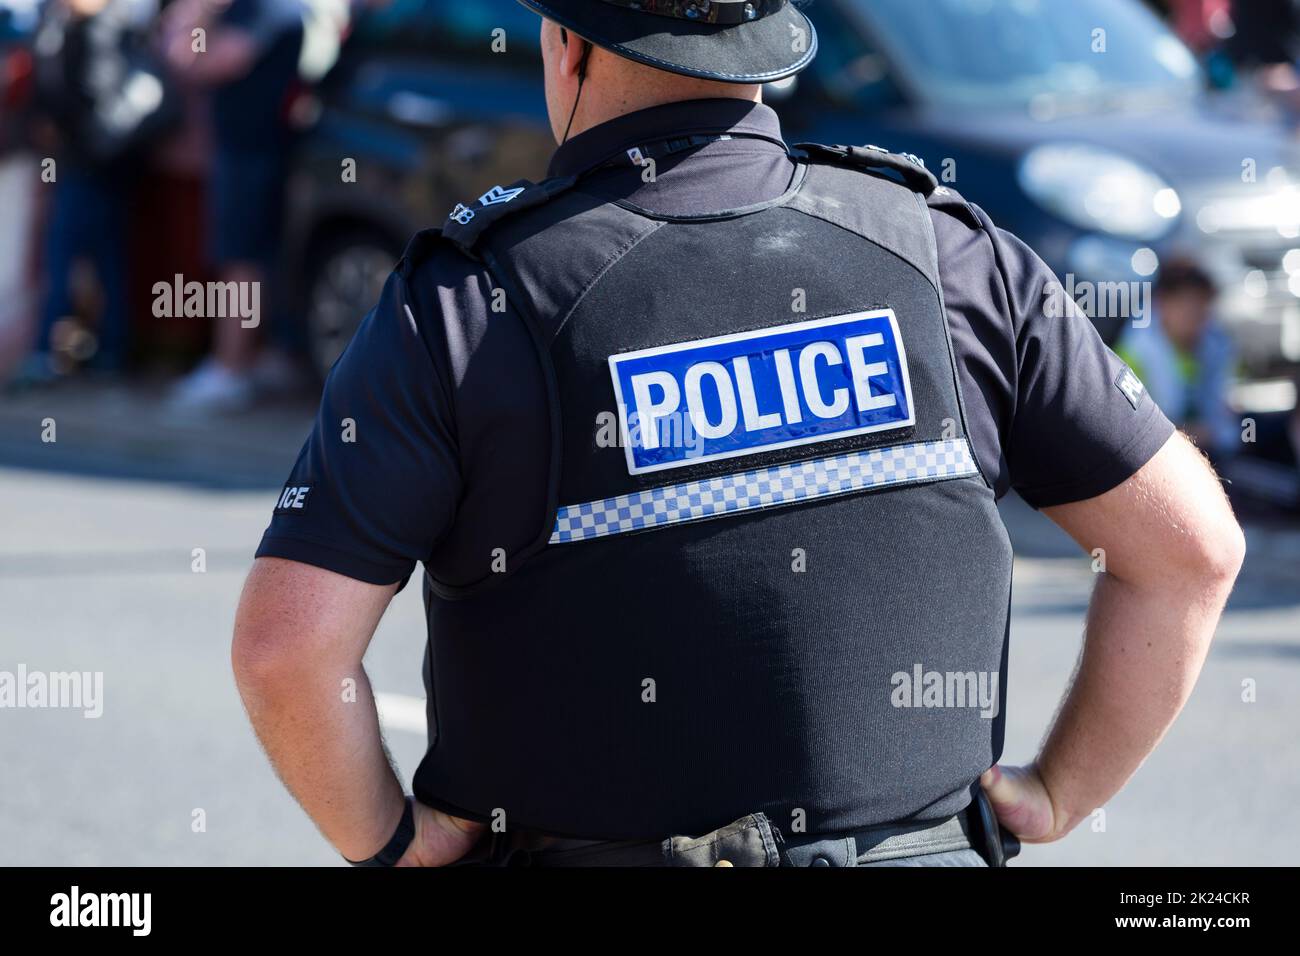 Policeman / Police Officer on duty at a public event wearing a stab proof vest which is part of his uniform. London. UK(132) Stock Photo